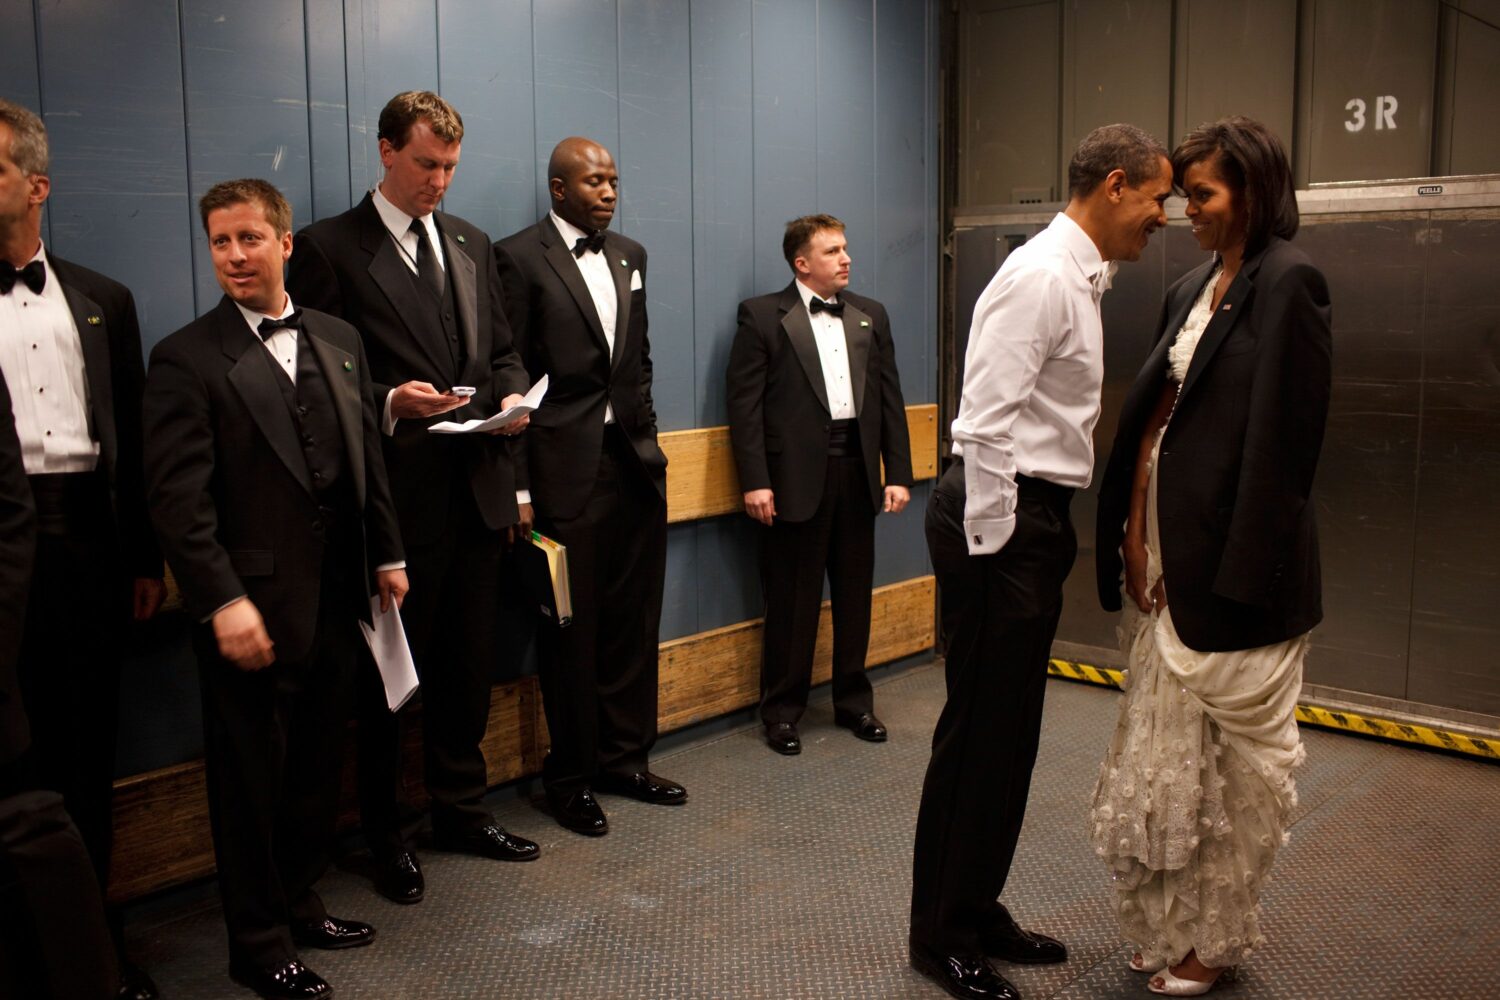 Pete Souza: Barack Obama and Michelle Obama in an elevator on their way to an Inaugural ball